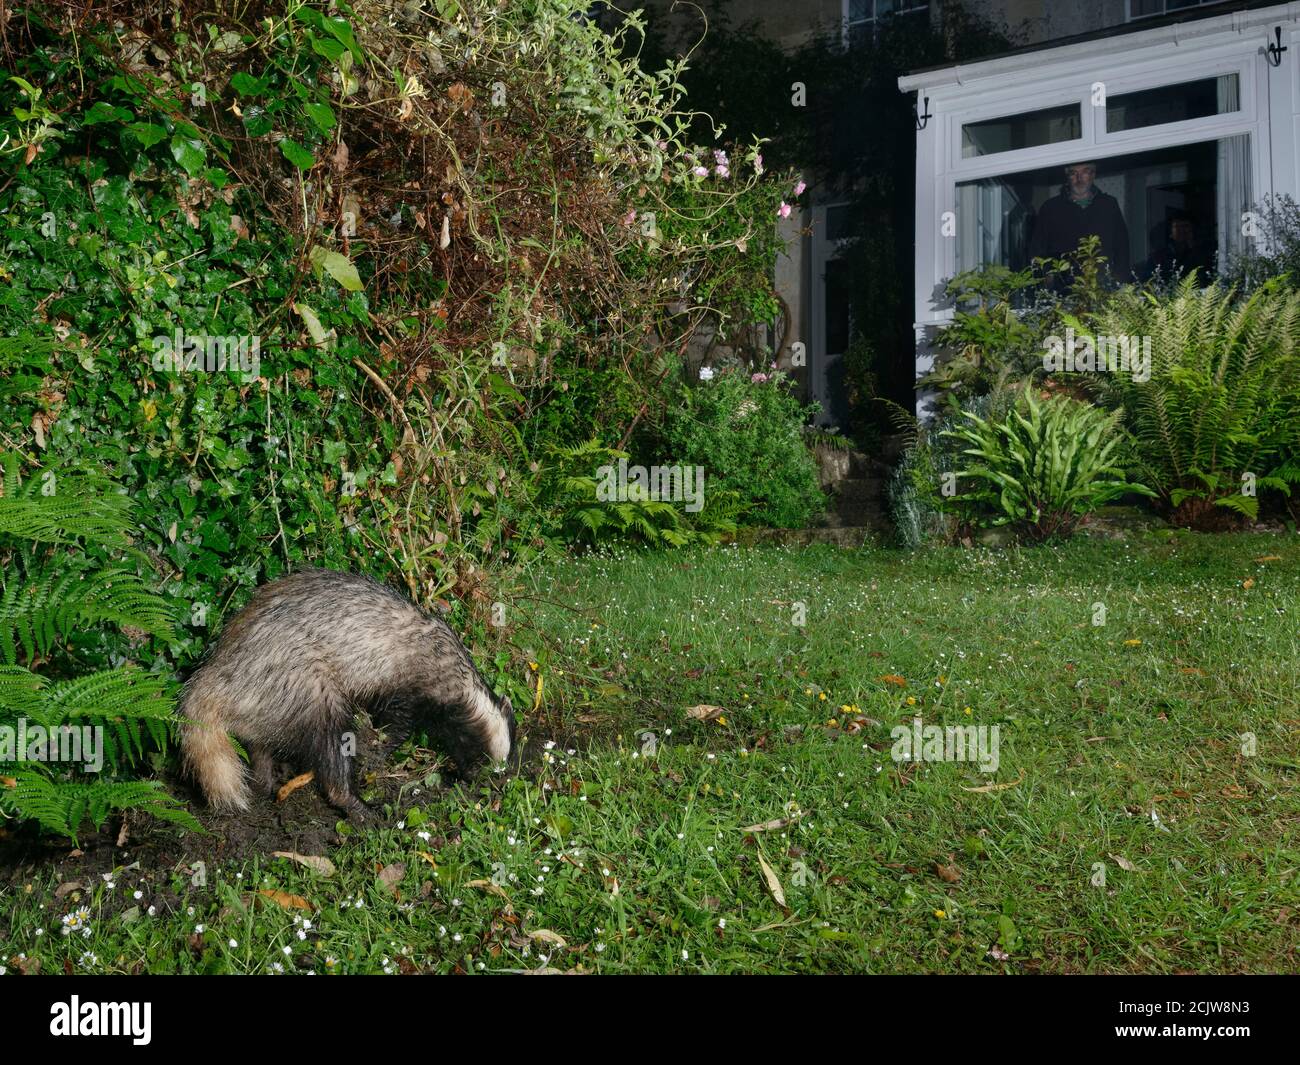 European badger (Meles meles) digging in a garden lawn at night  to excavate a Bumblebee nest to feed on, with the homeowner watching, June 2020. Stock Photo